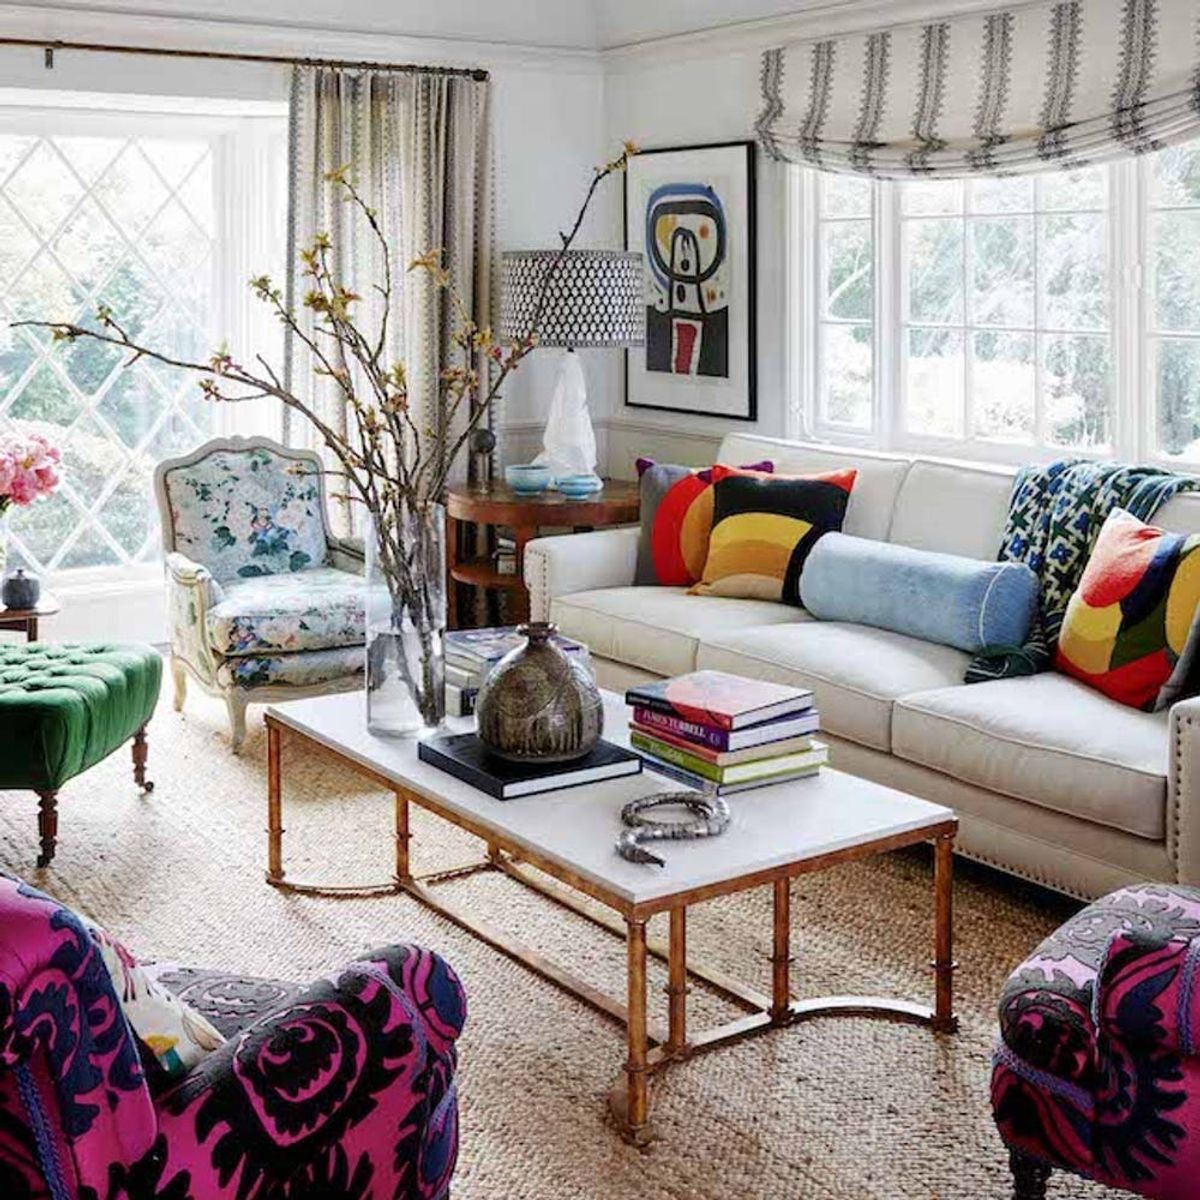 Get Ready to Swoon Over Minnie Driver’s Eclectic New Home